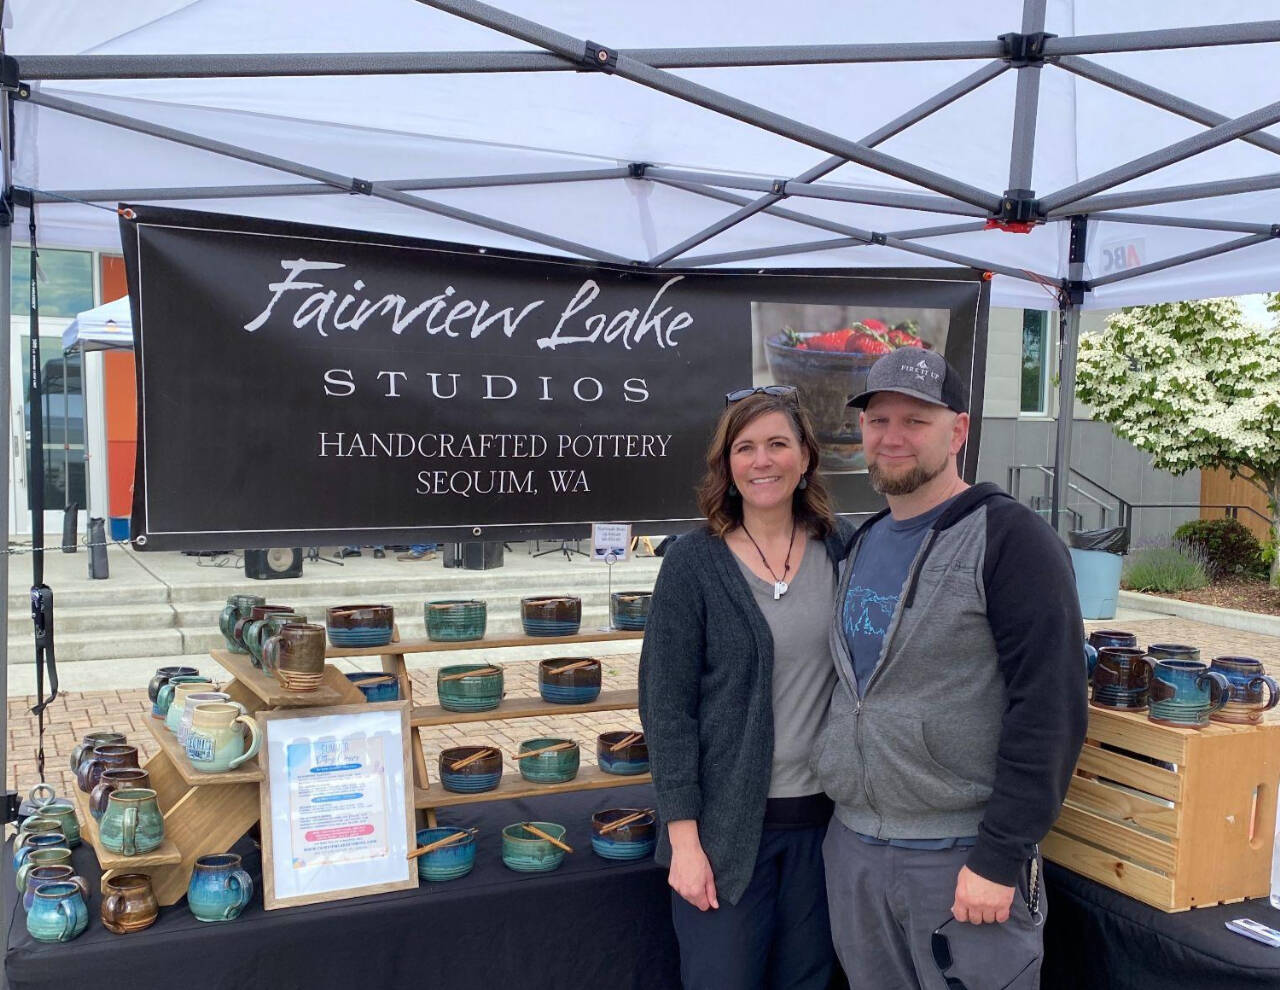 Photos by Layla Forêt
Check out Fairview Lake Studios’ handmade, functional stoneware pottery, created by Brian and Wendy Fuller, at the Sequim Farmers & Artisans Market.